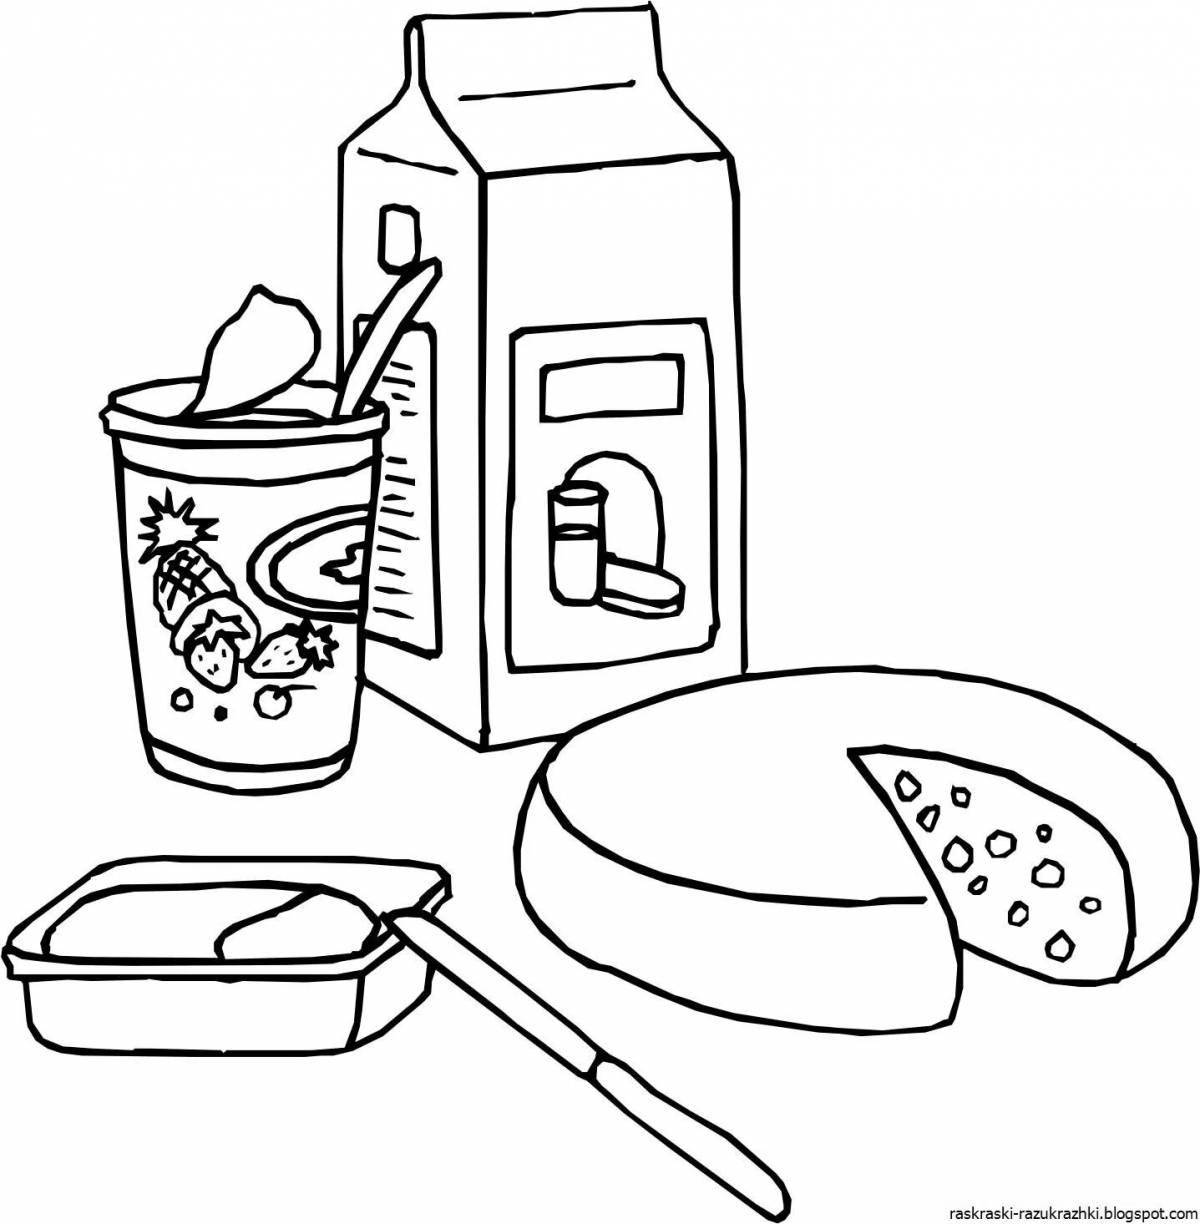 Sparkling healthy food coloring pages for 4-5 year olds